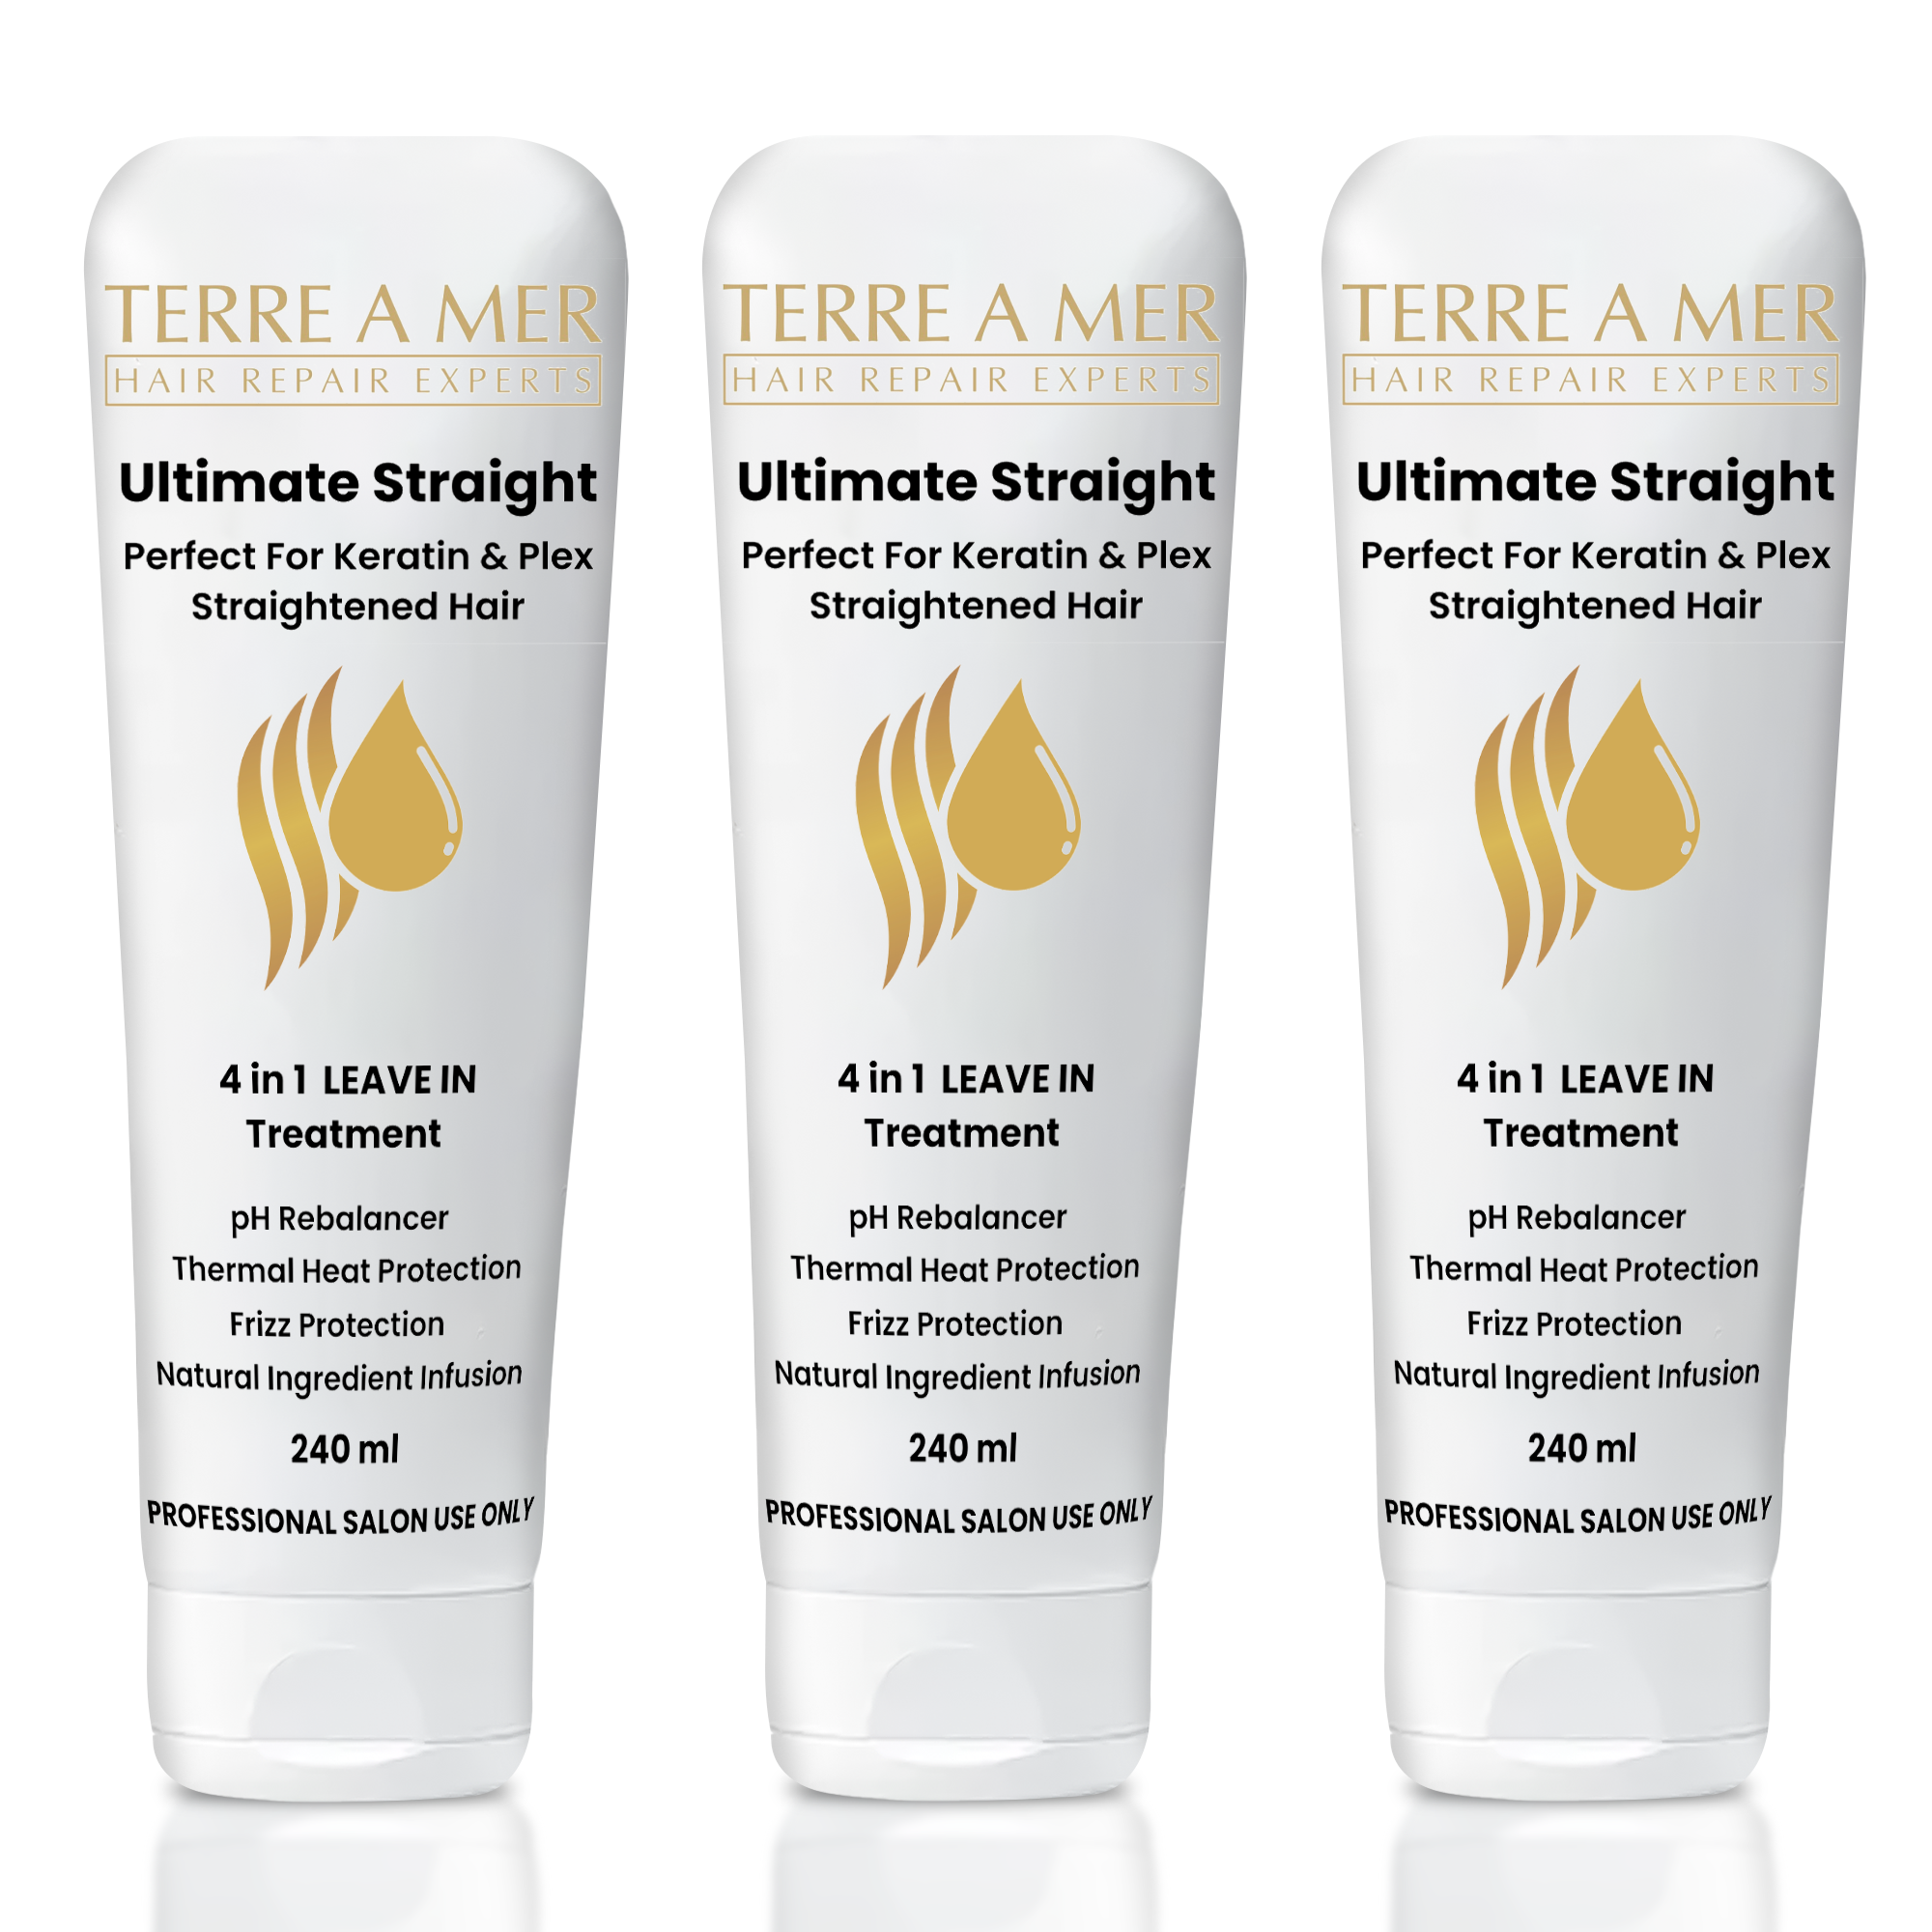 Ultimate Straight Leave-IN (240ml)